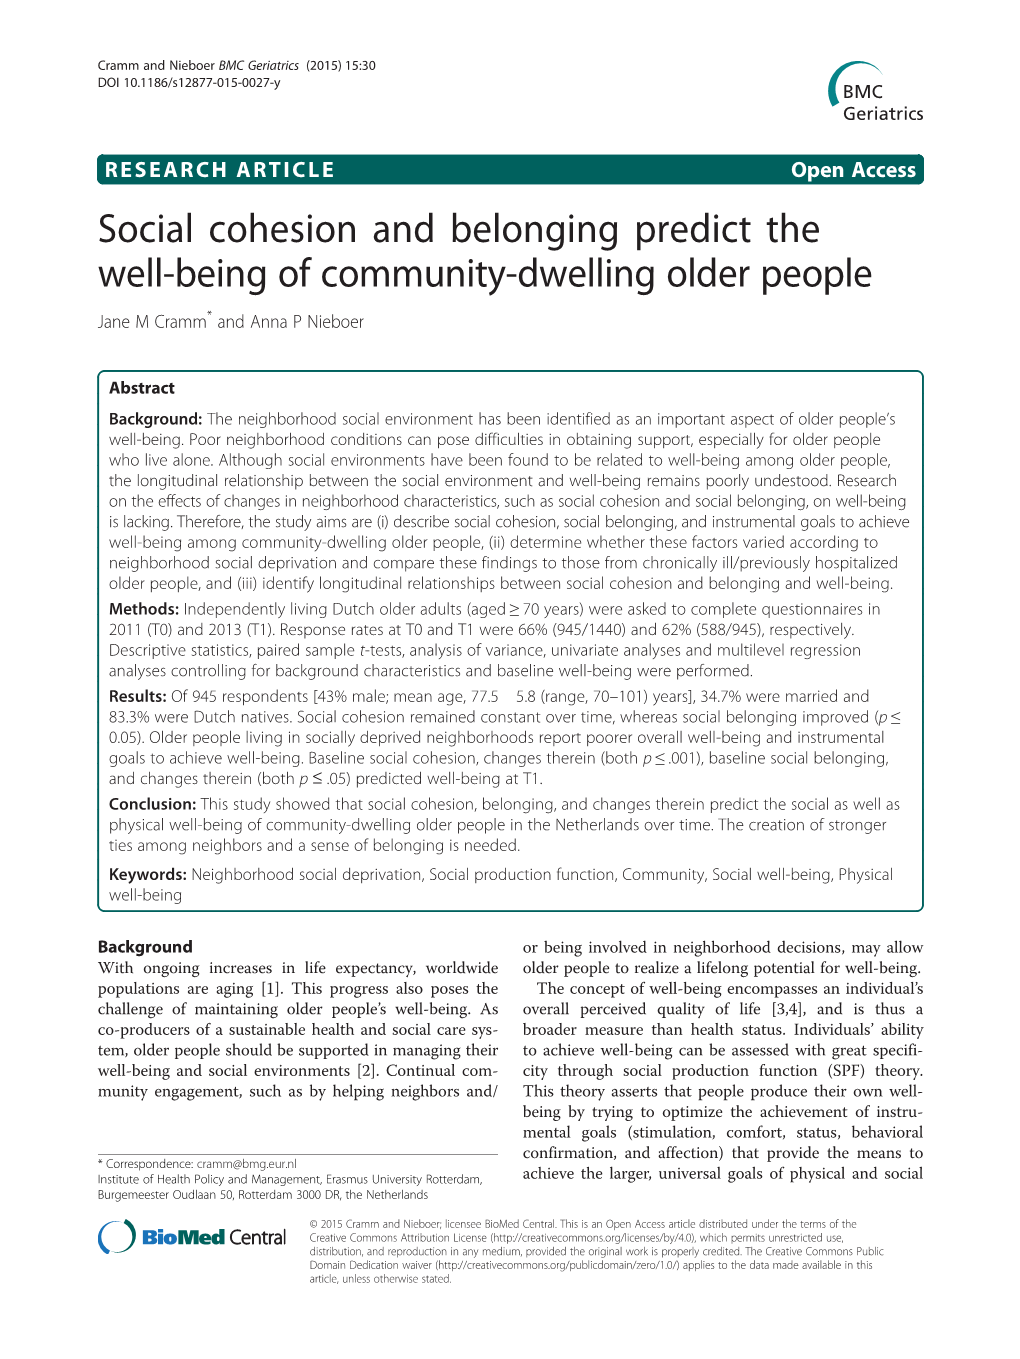 Social Cohesion and Belonging Predict the Well-Being of Community-Dwelling Older People Jane M Cramm* and Anna P Nieboer